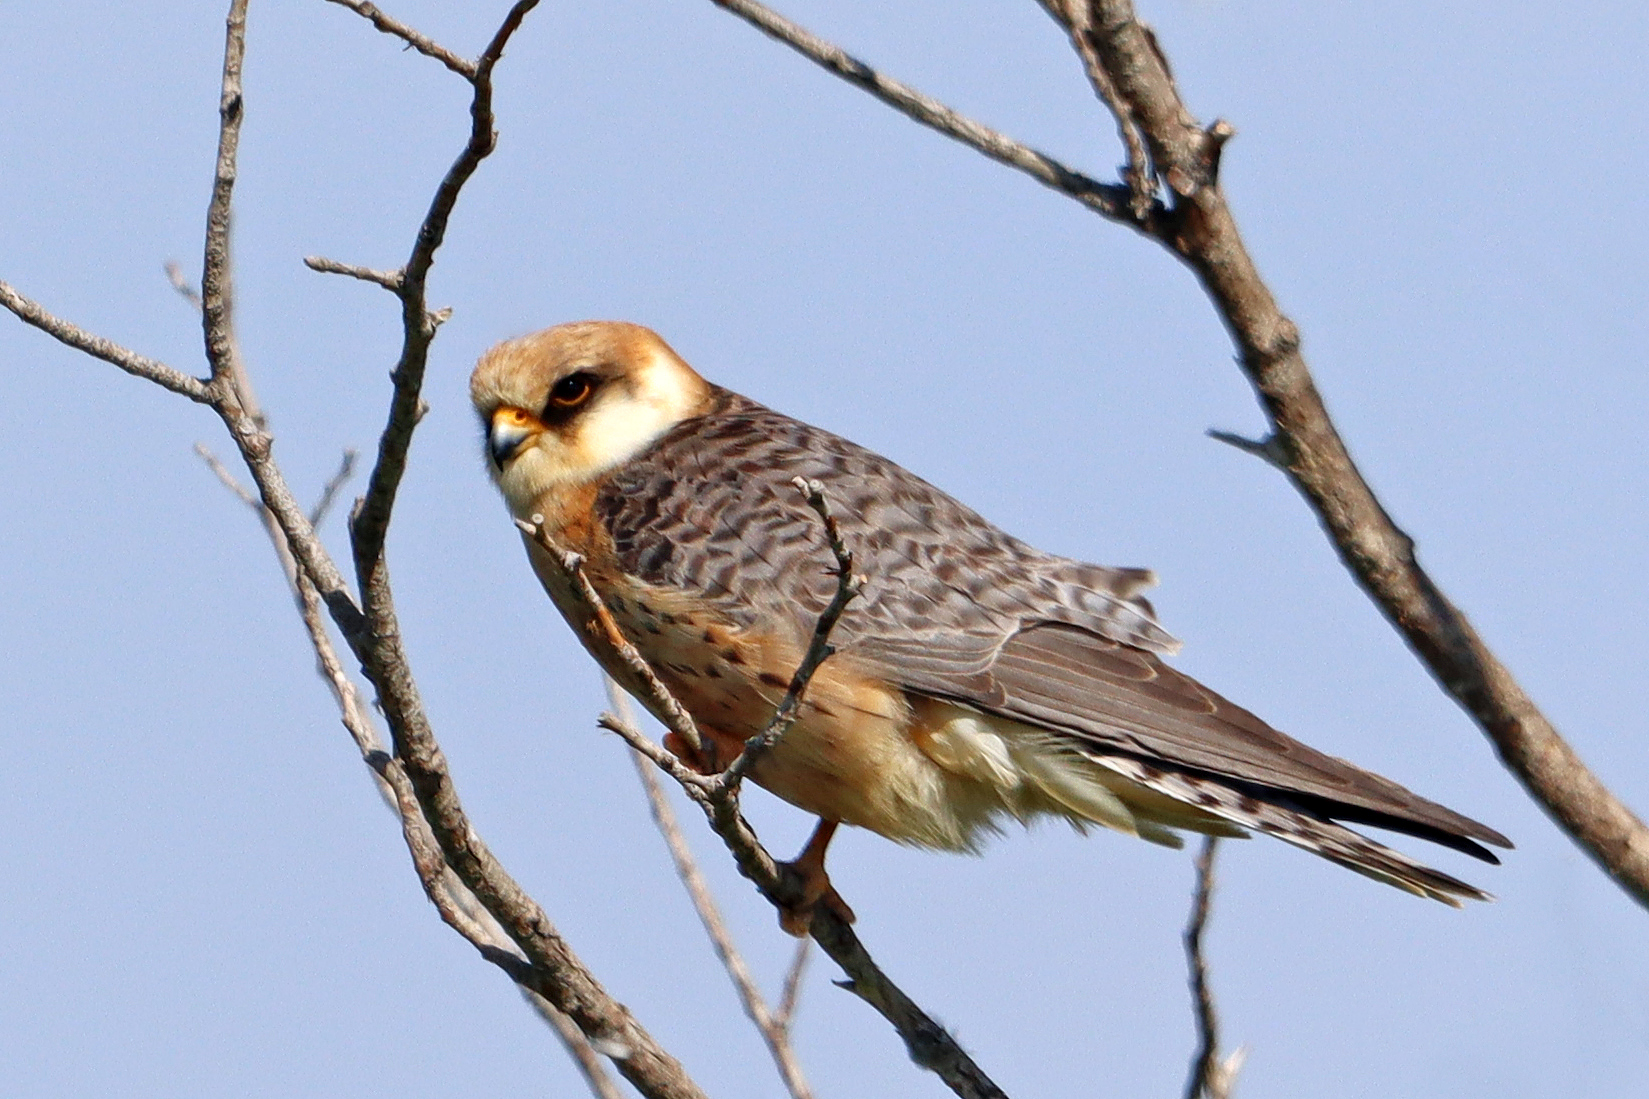 Red-Footed Falcon (Falco vespertinus). Photo by N. Ongarbayev